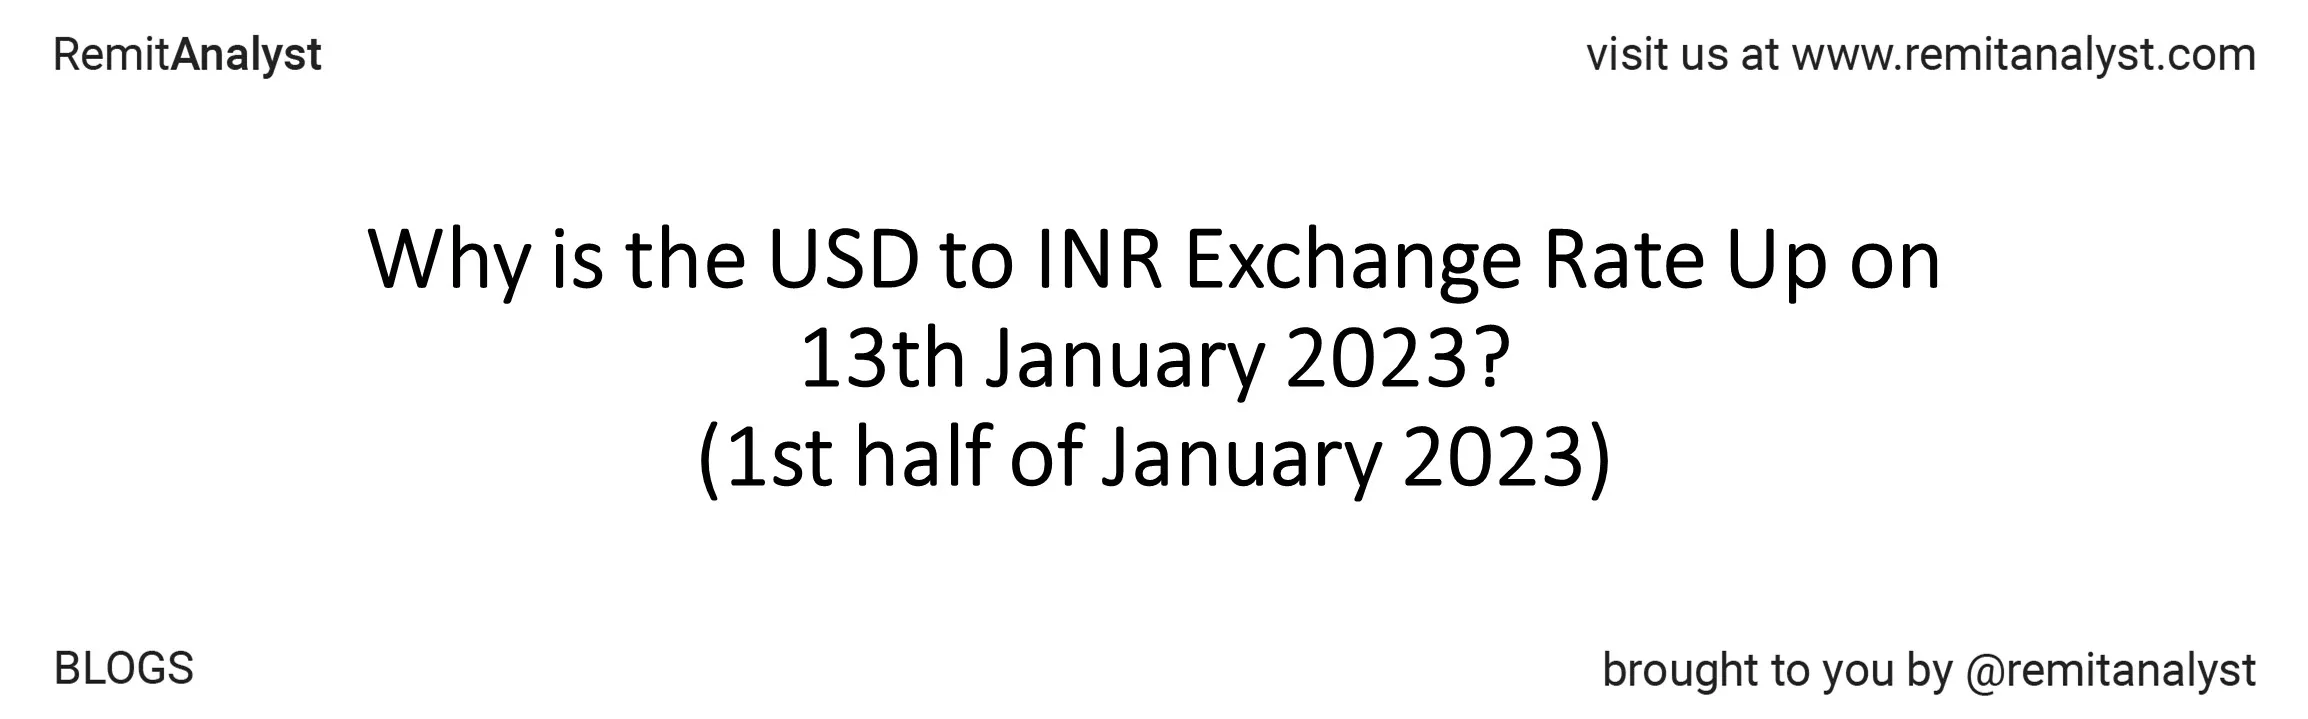 usd-to-inr-exchange-rate-2-jan-2023-to-13-jan-2023-title